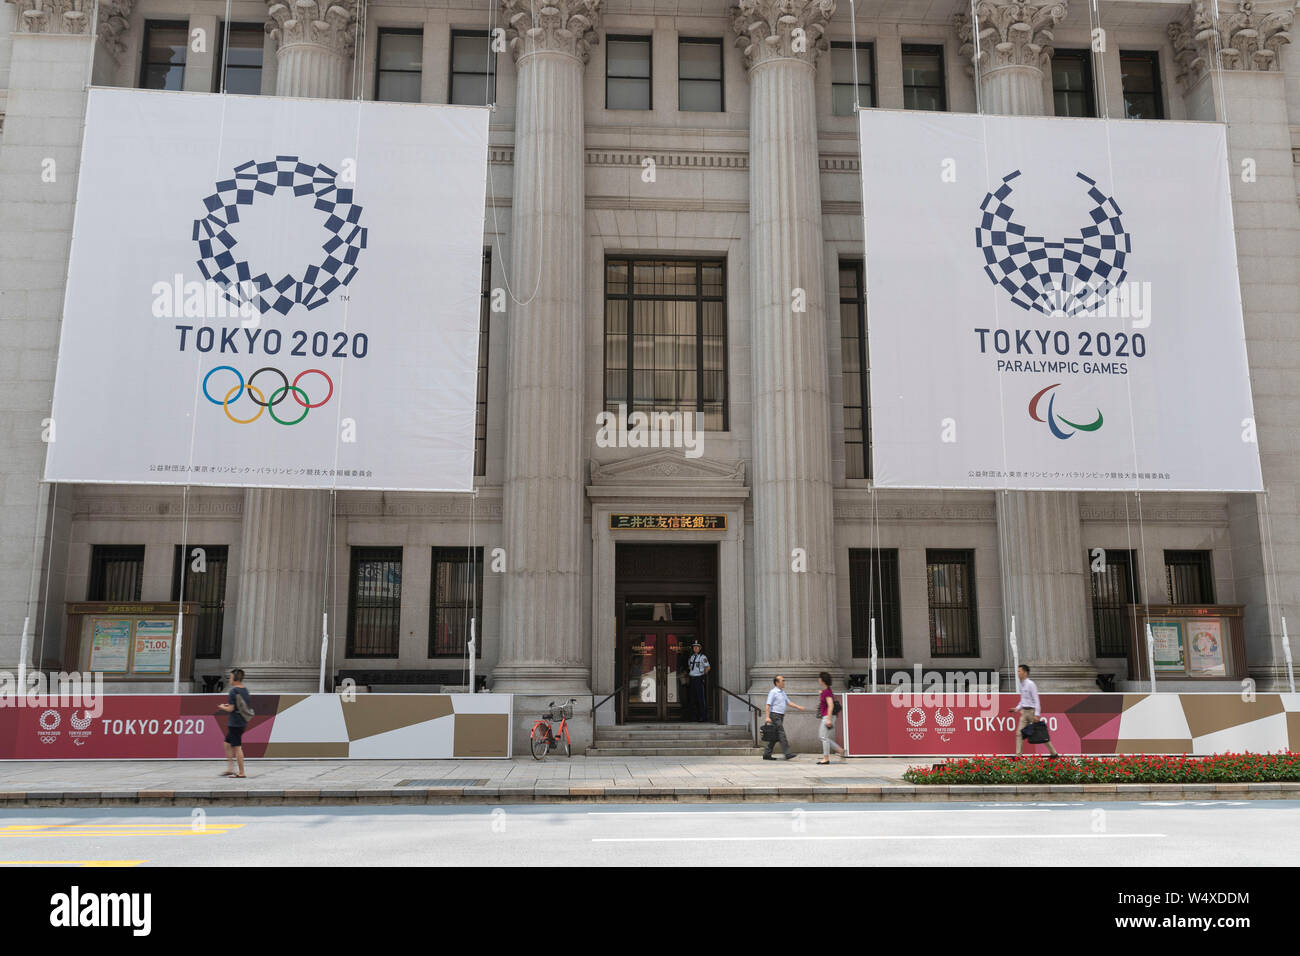 Tokyo, Japan. 25th July, 2019. Huge banners of Tokyo 2020 Olympic Games are on display outside Sumitomo Mitsui Trust Bank to promote the 2020 Tokyo Olympic and Paralympic Games. Tokyo marks one year to go 2020 Olympics decorating with Olympic emblems and photos of Japanese athletes some buildings of Nihonbashi district in Tokyo. The Games are set to open on July 24, 2020. Credit: Rodrigo Reyes Marin/AFLO/Alamy Live News Stock Photo